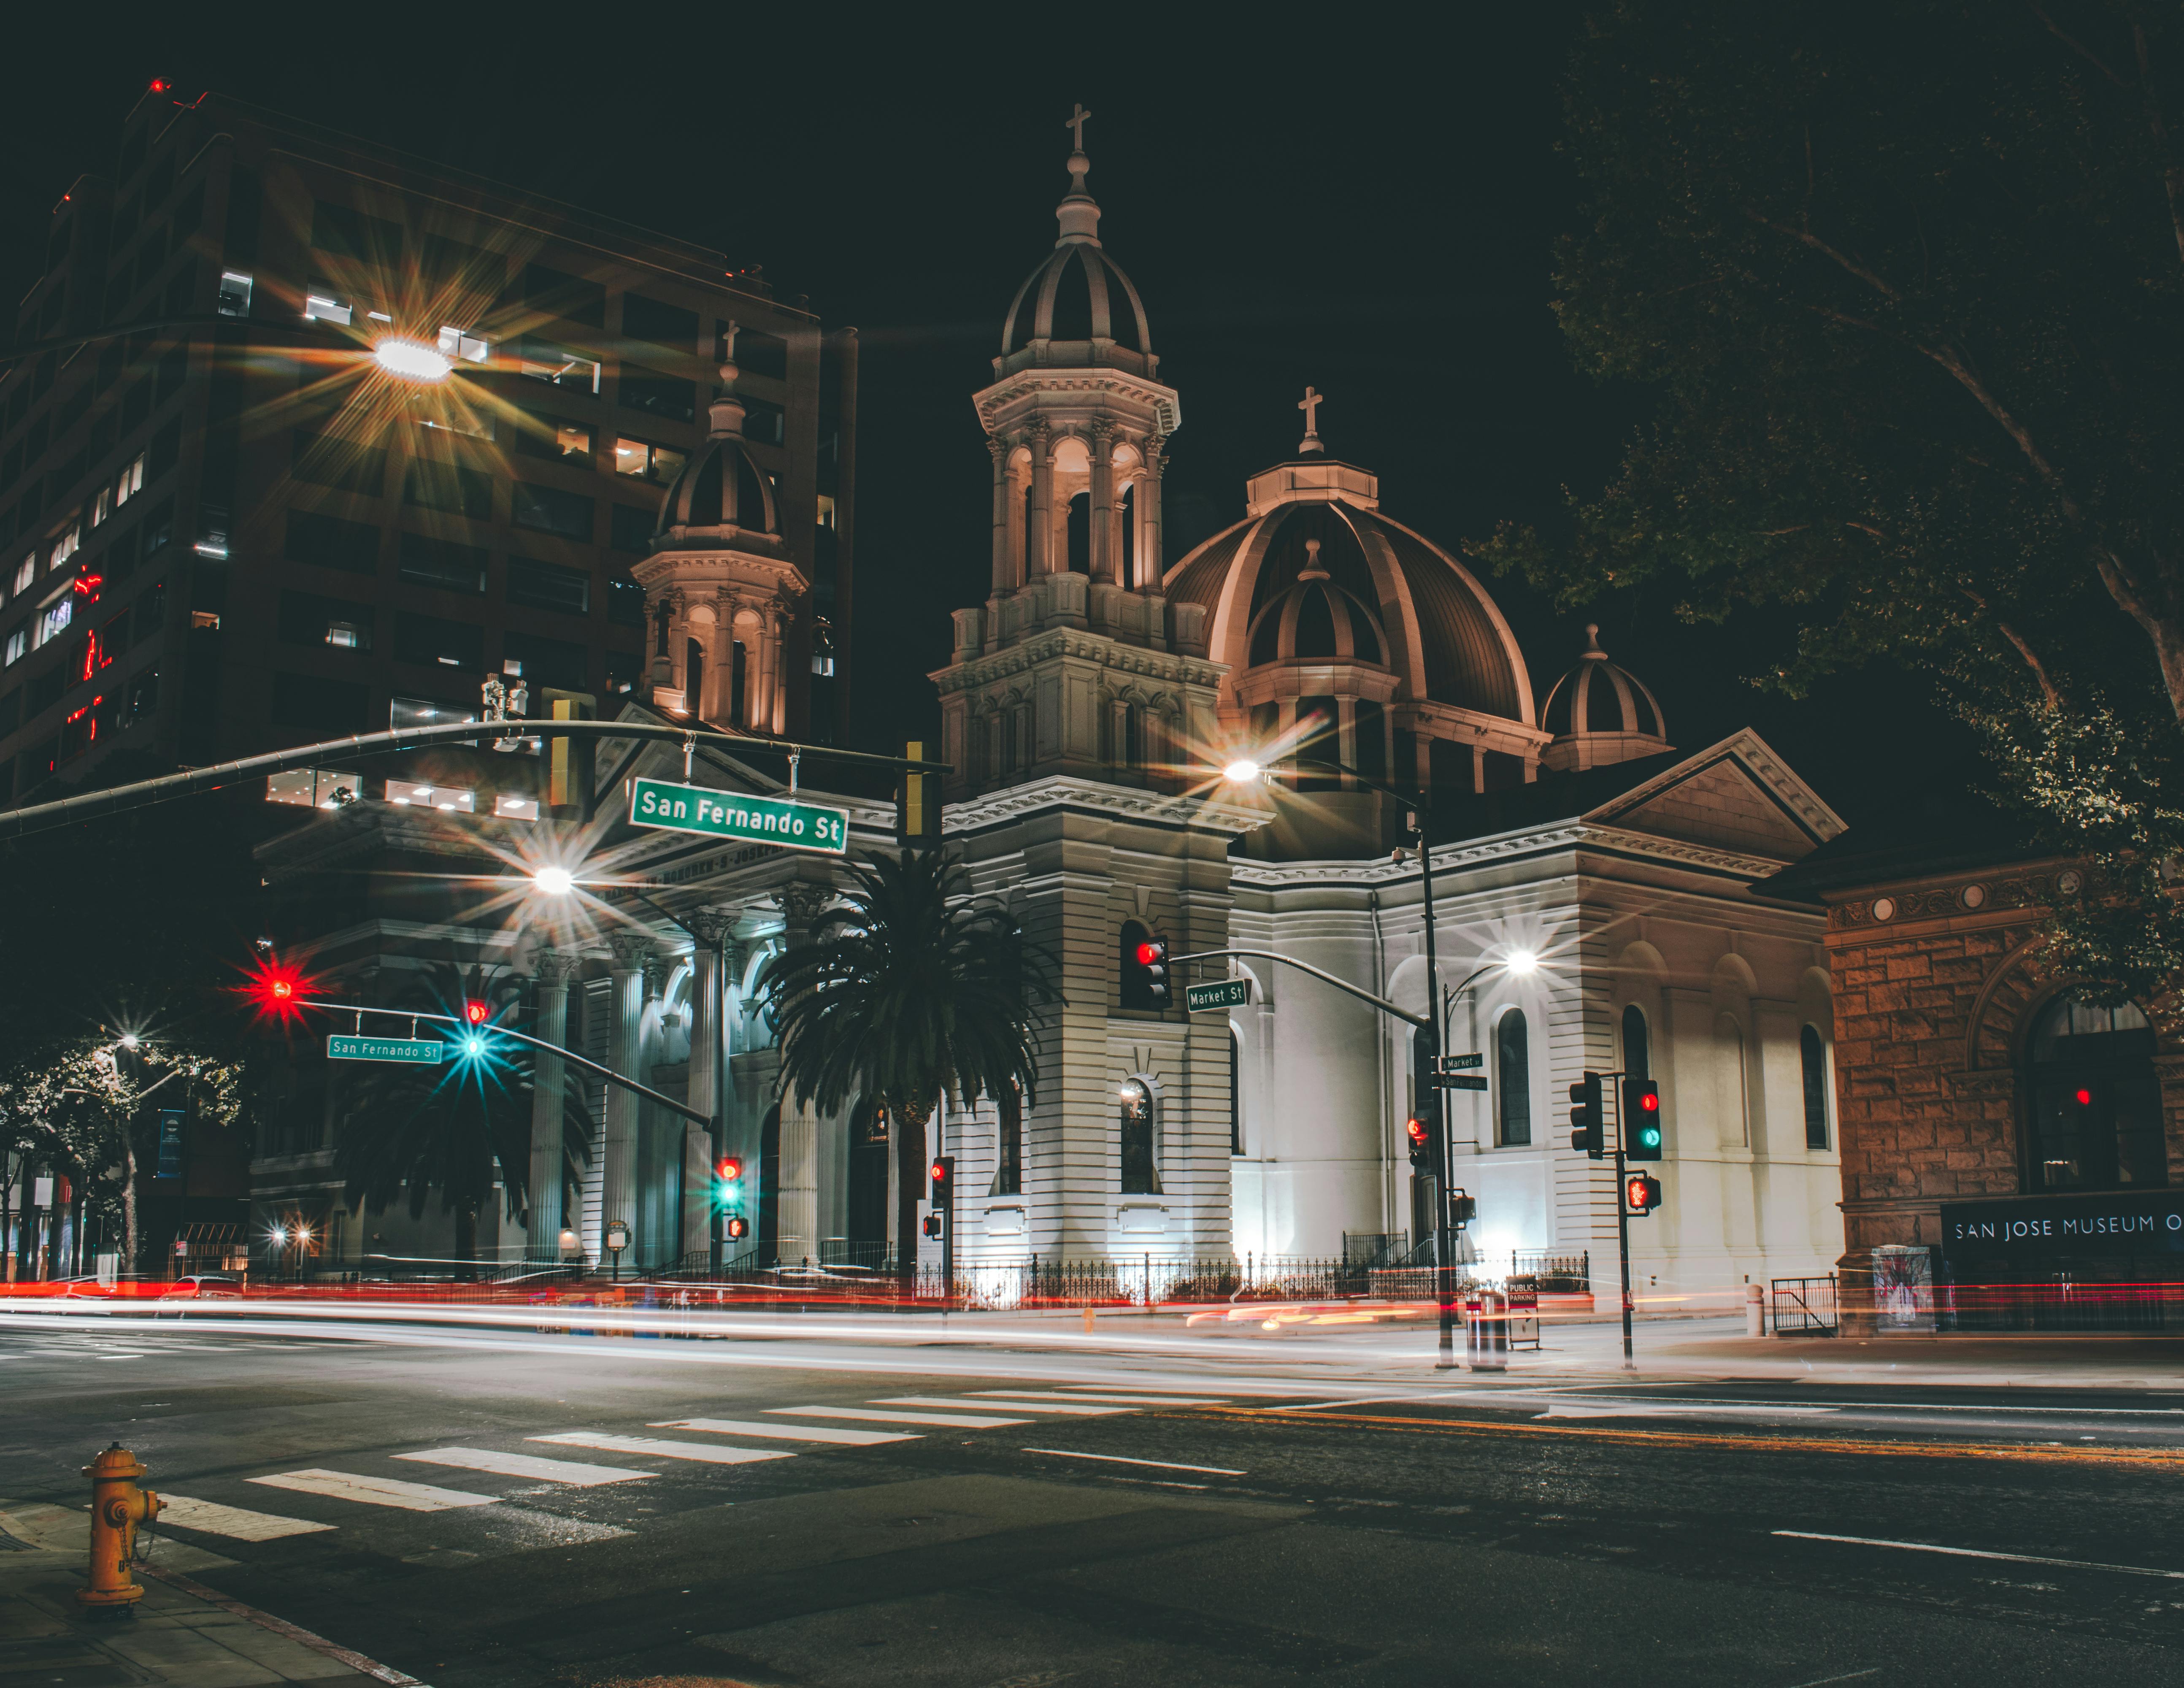 Free stock photo of building, church building, light trails